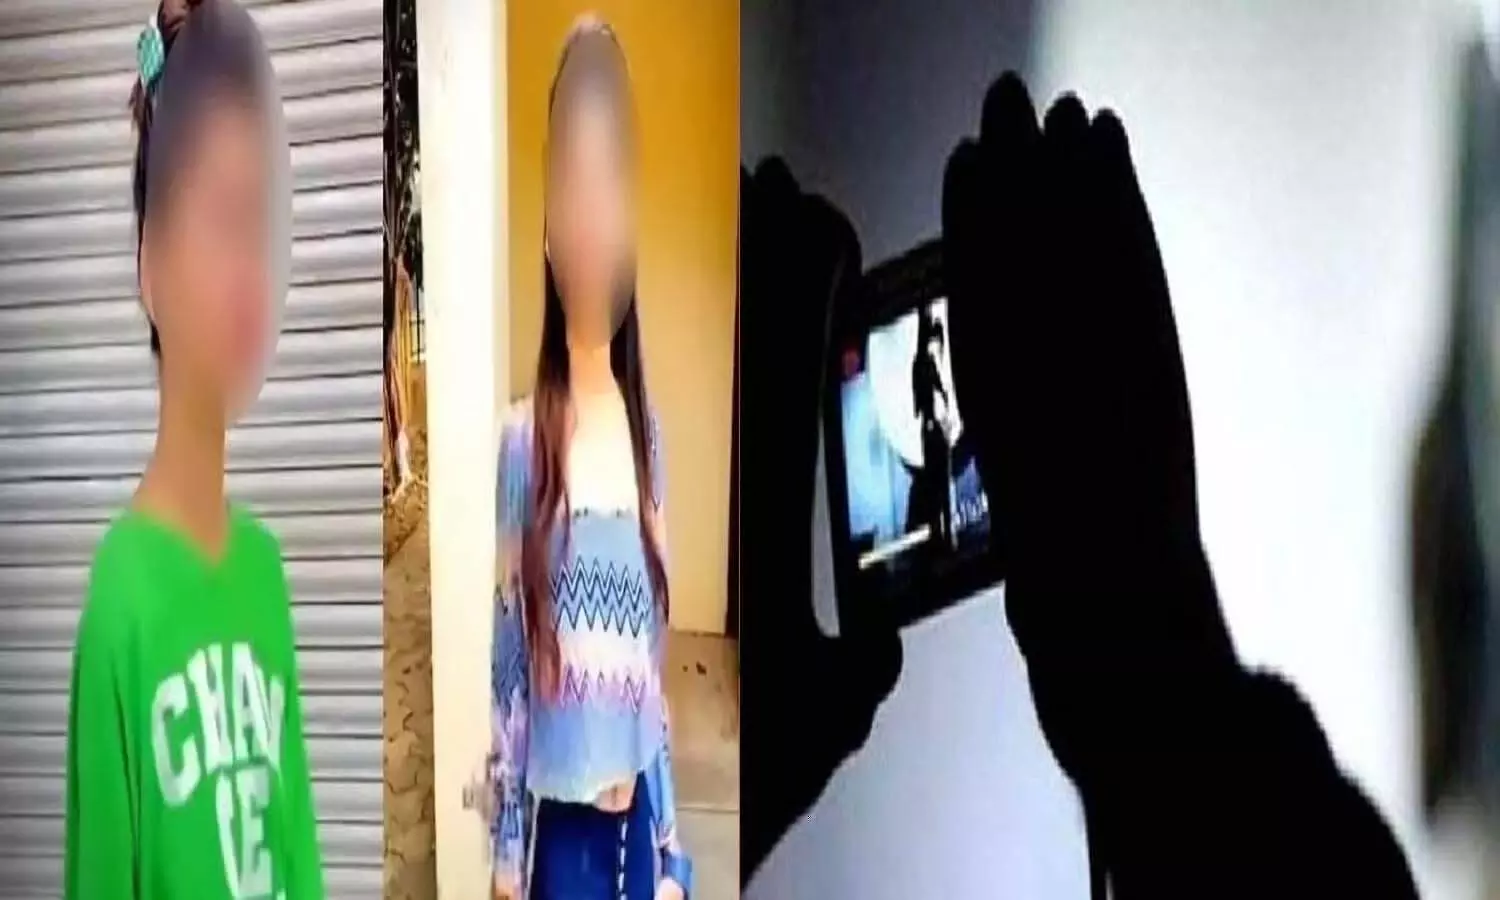 Porn Videos Case: Queen and criminal two girls arrested by police, used to make porn videos on Instagram